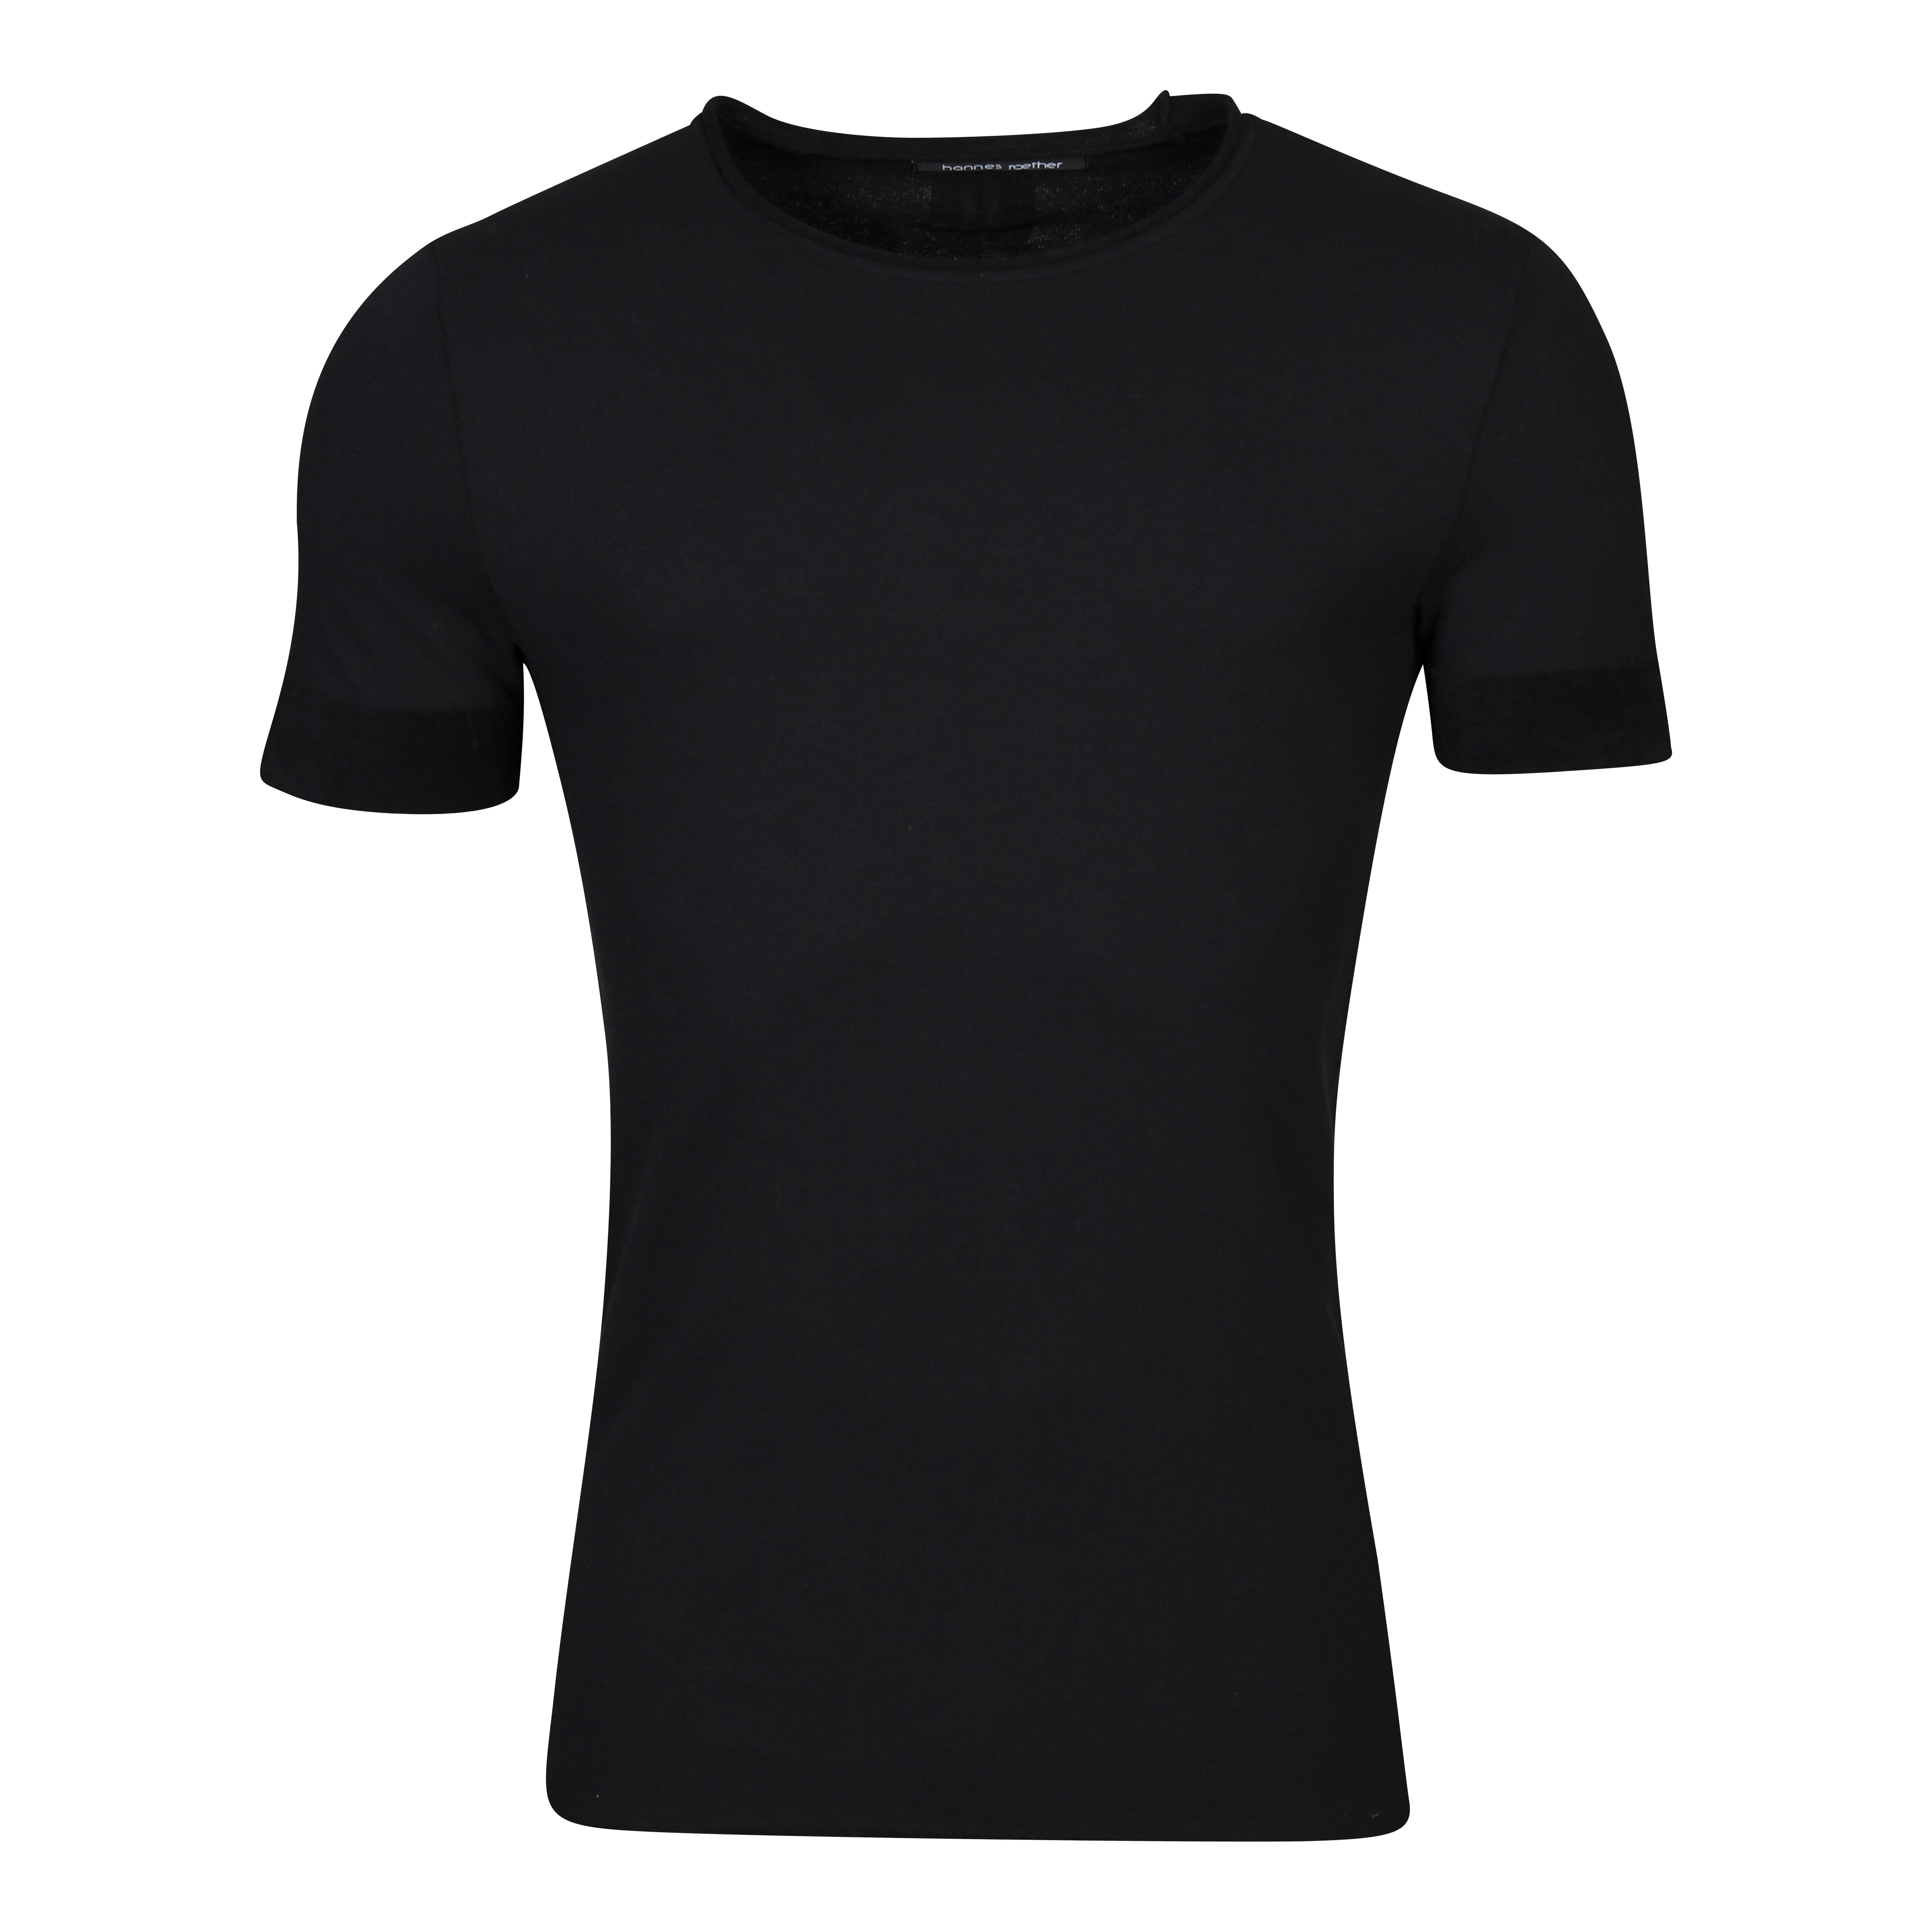 Hannes Roether Frottee T-Shirt in Black